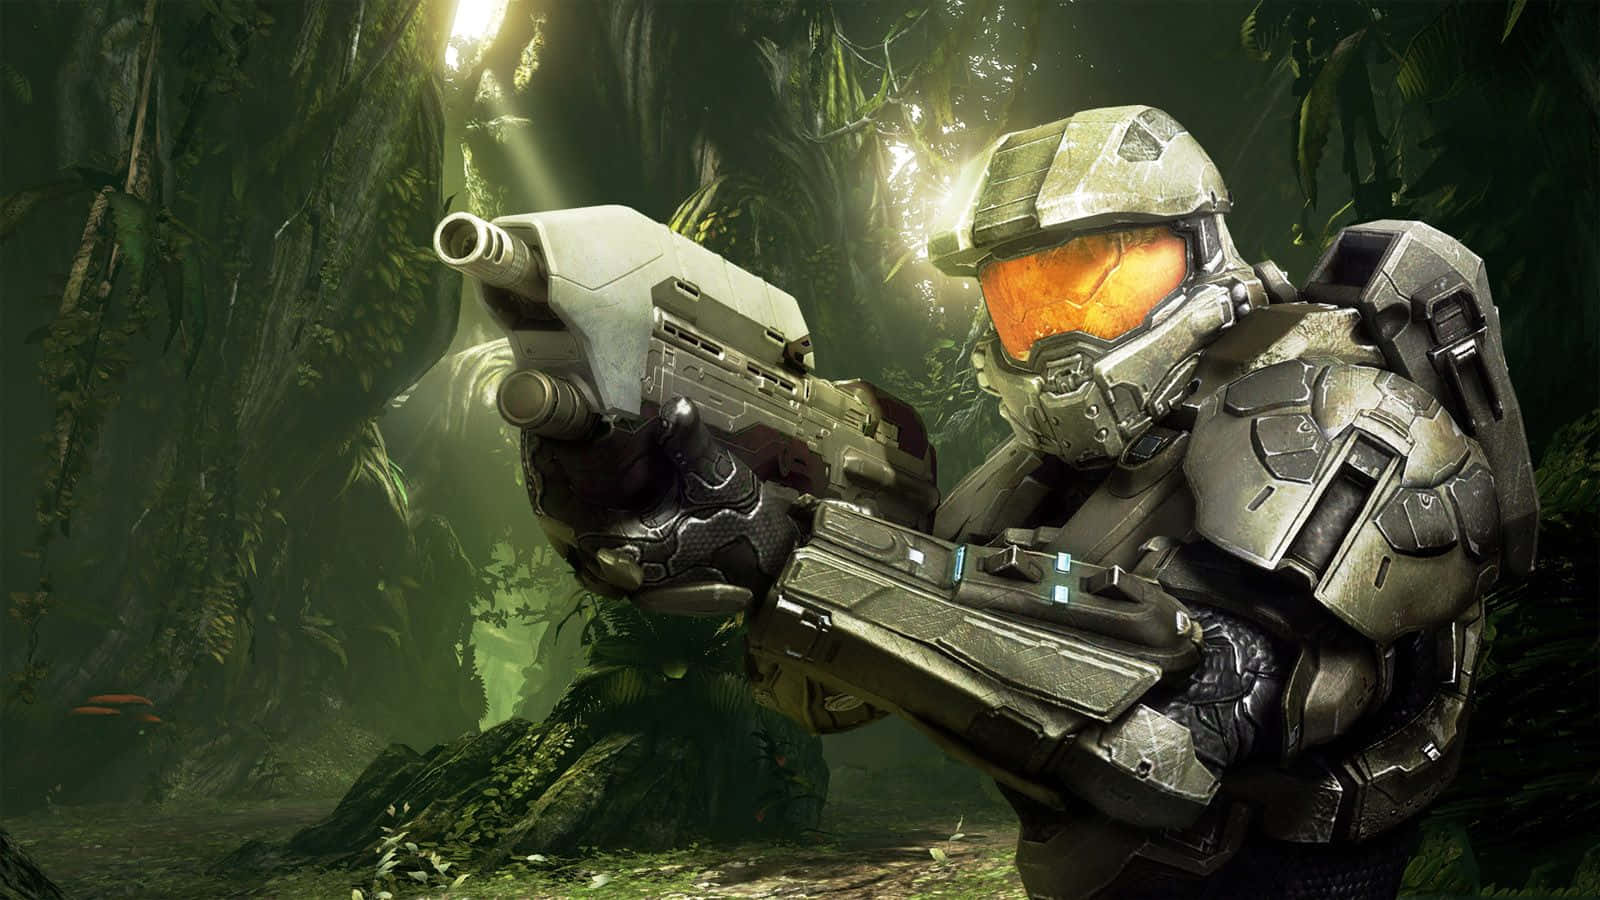 Halo Master Chief Faceless Soldier Wallpaper